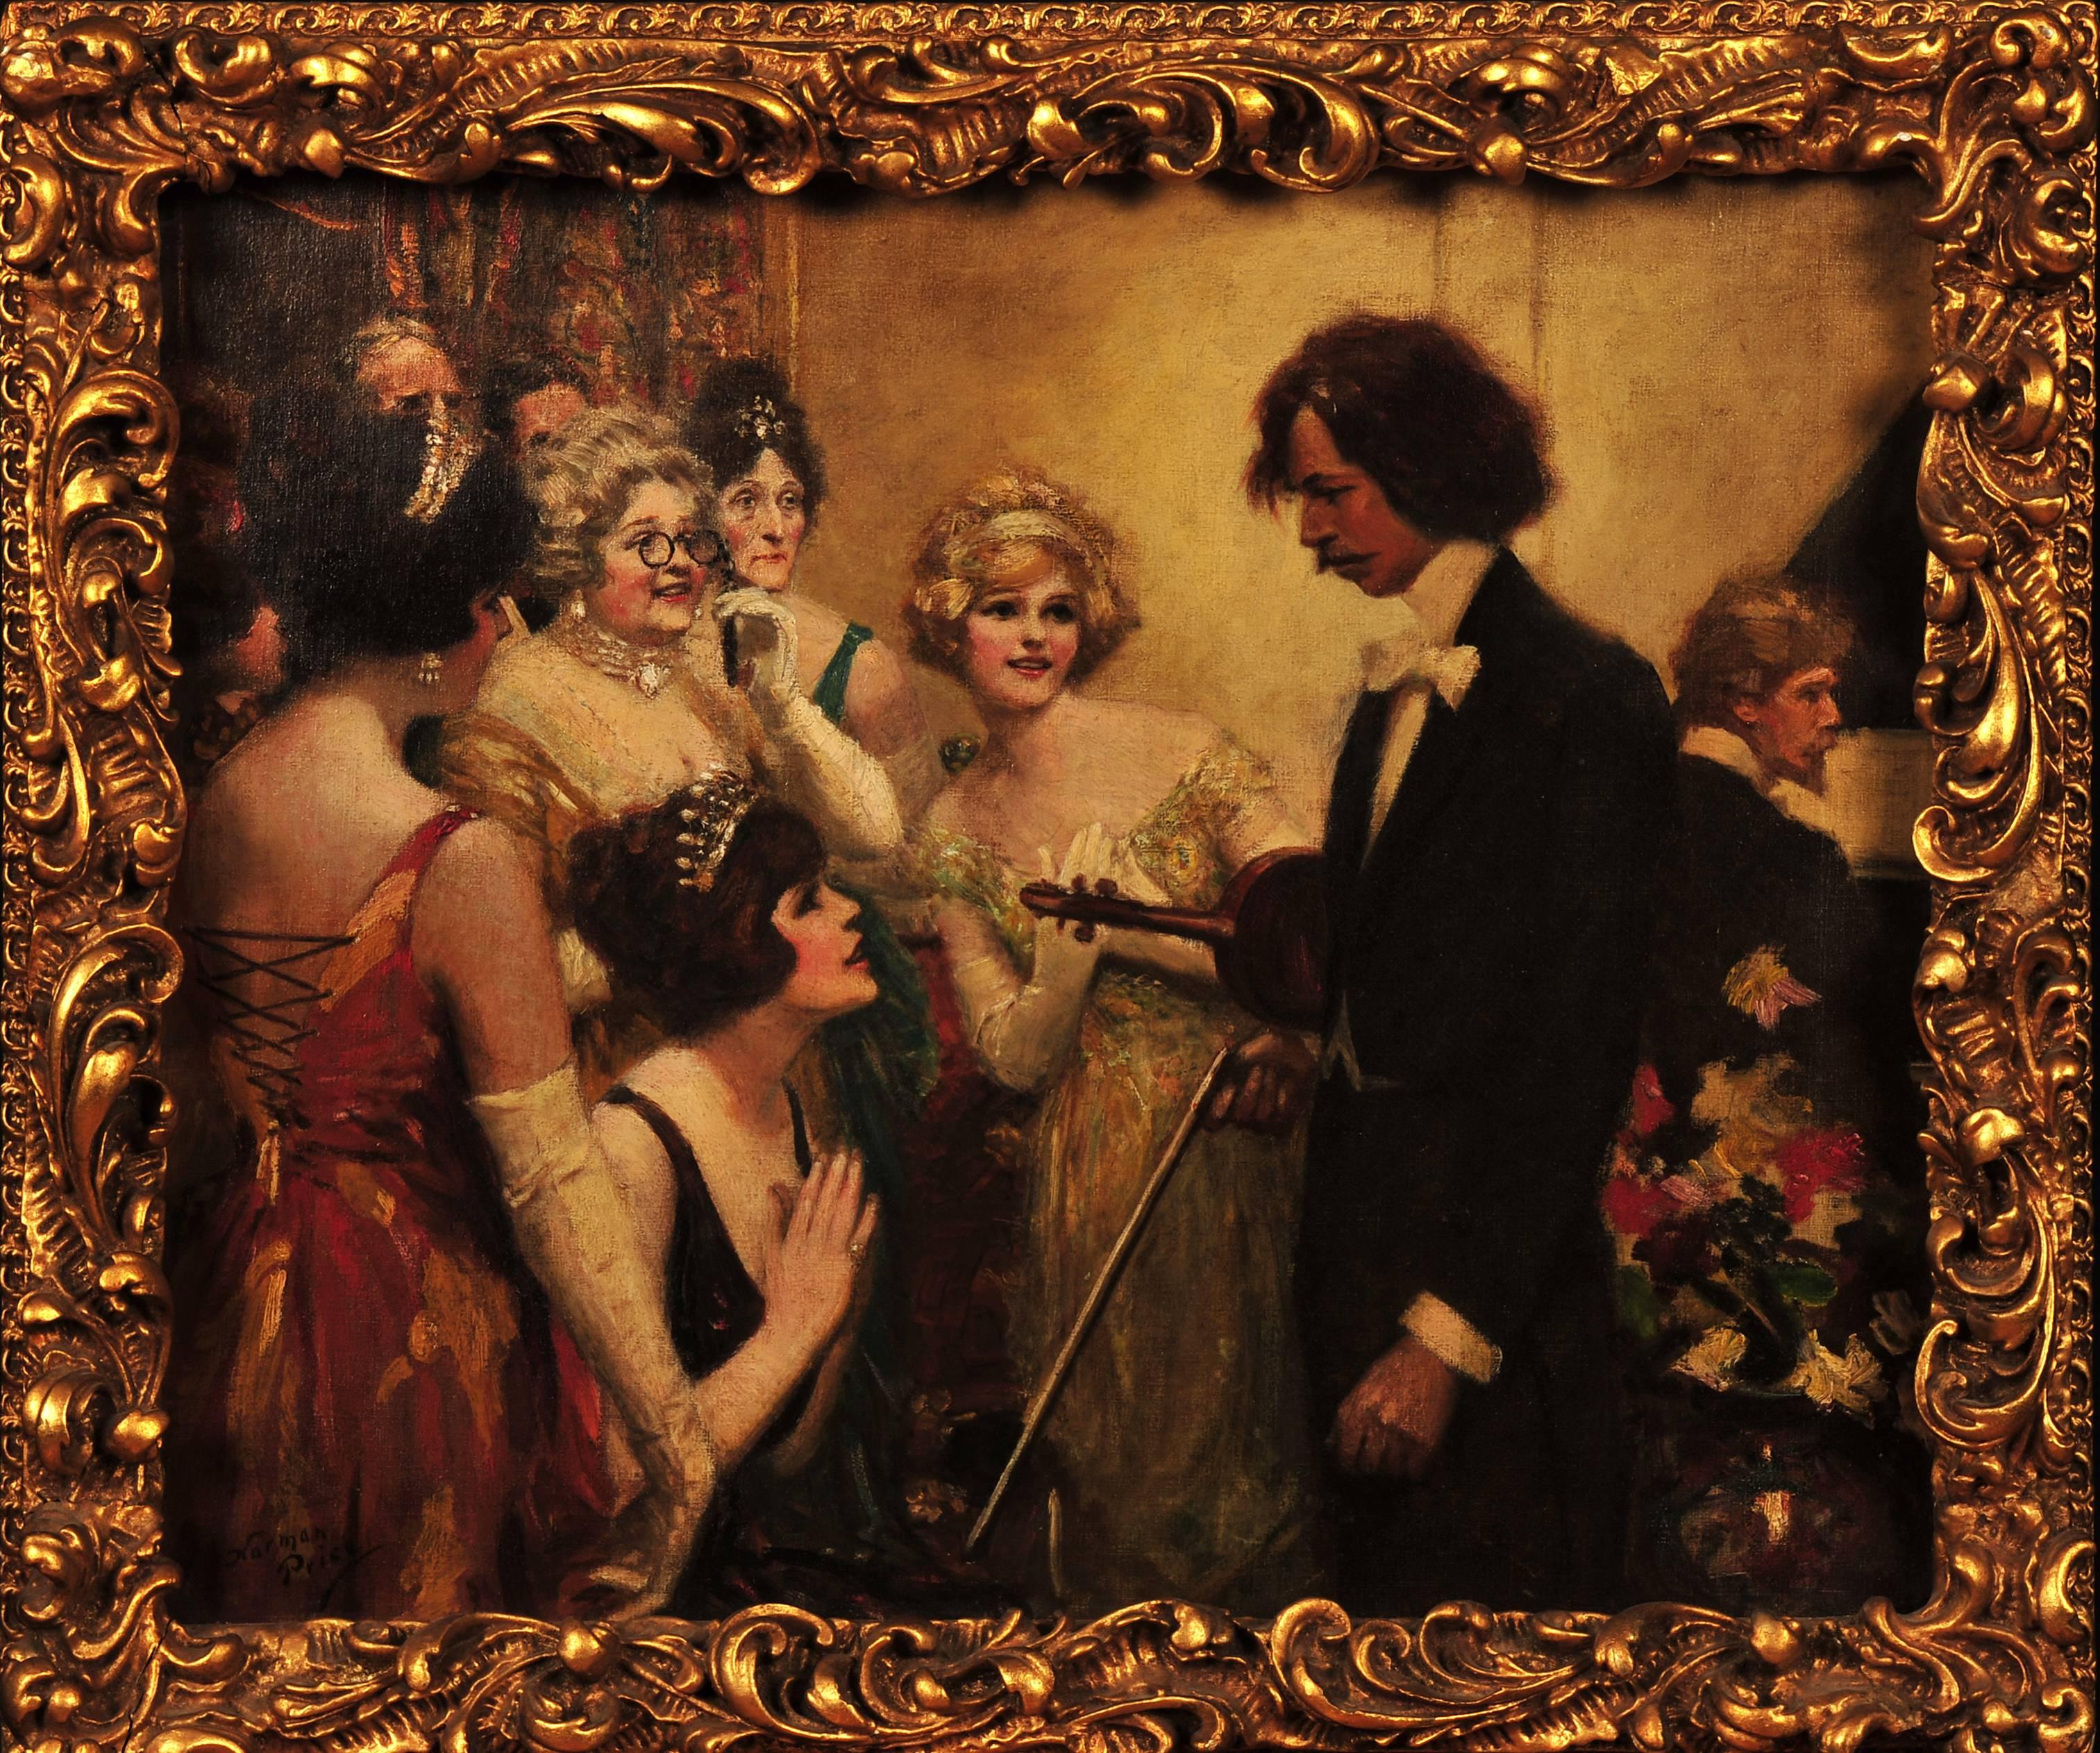 Violinist Admired by Women at Party - Painting by Norman Price